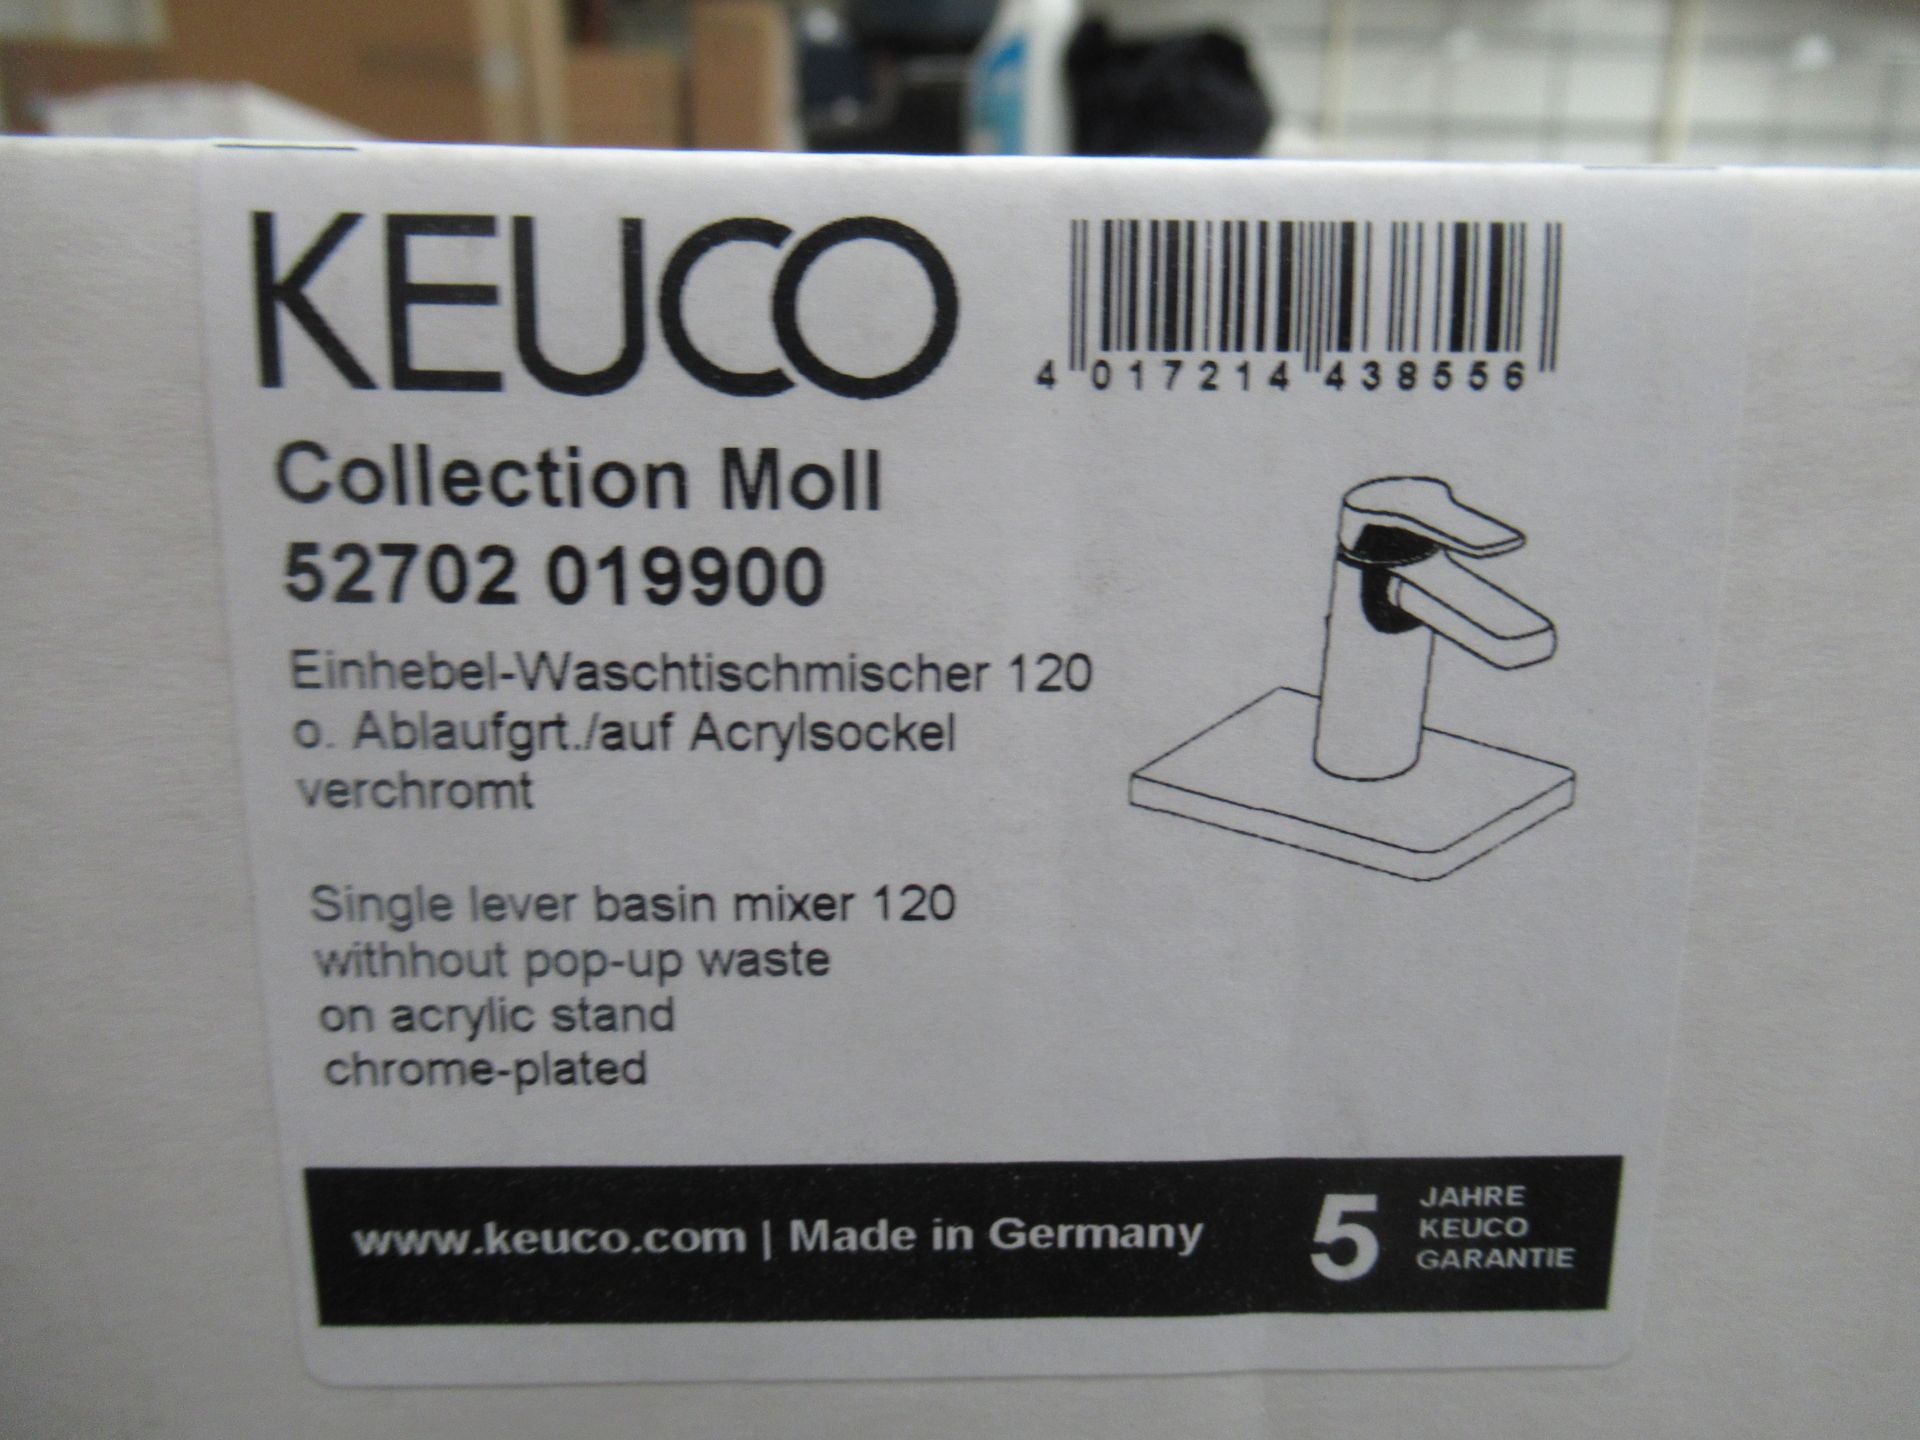 2 x Keuco Collection Moll Single Lever Basin Mixer 120-Tap, Chrome Plated, P/N 52702-019900 - Image 2 of 3